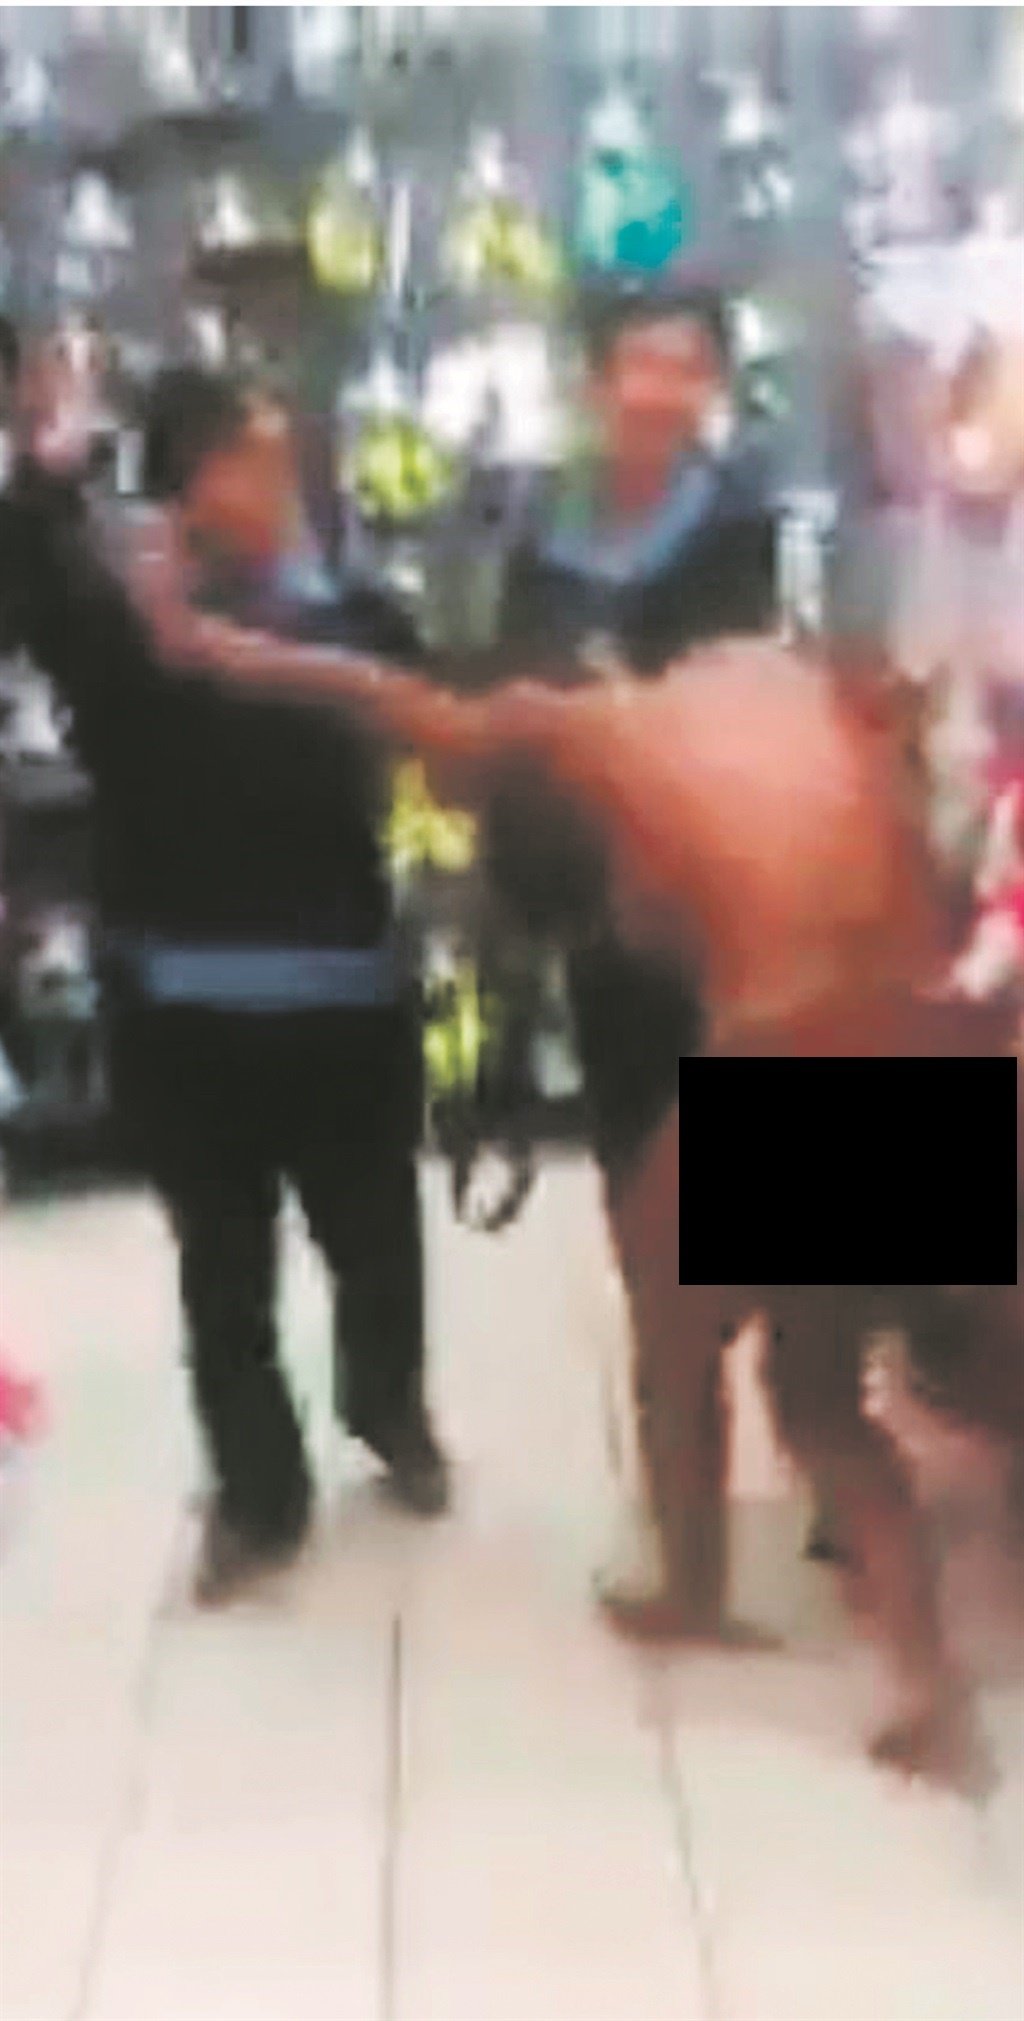 Screen grabs from the video show the alleged shoplifter being whipped.